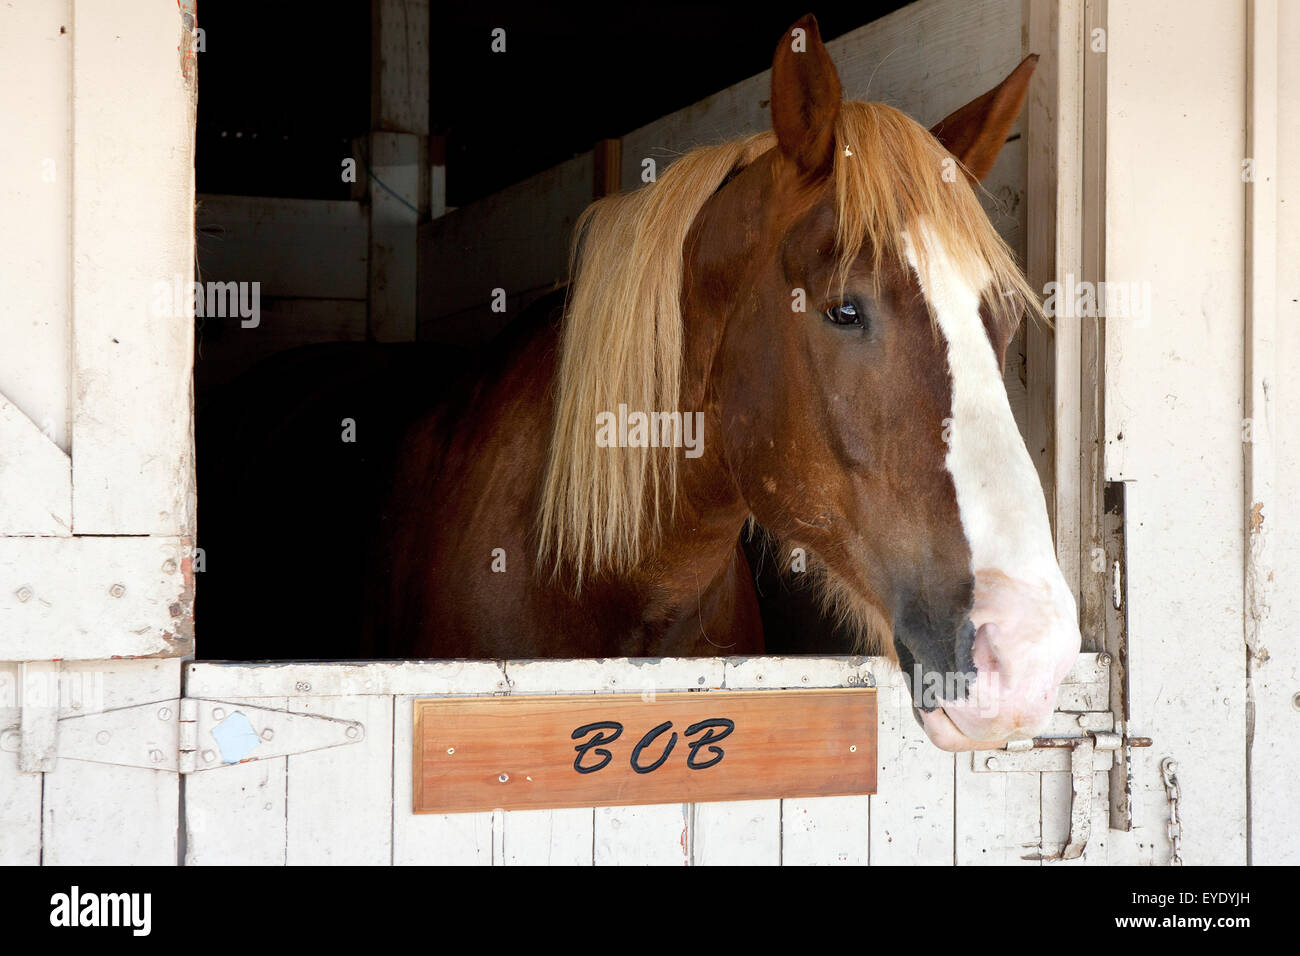 A horse named Bob in a stall at the California Mid State Fair, Paso Robles, California, United States of America Stock Photo